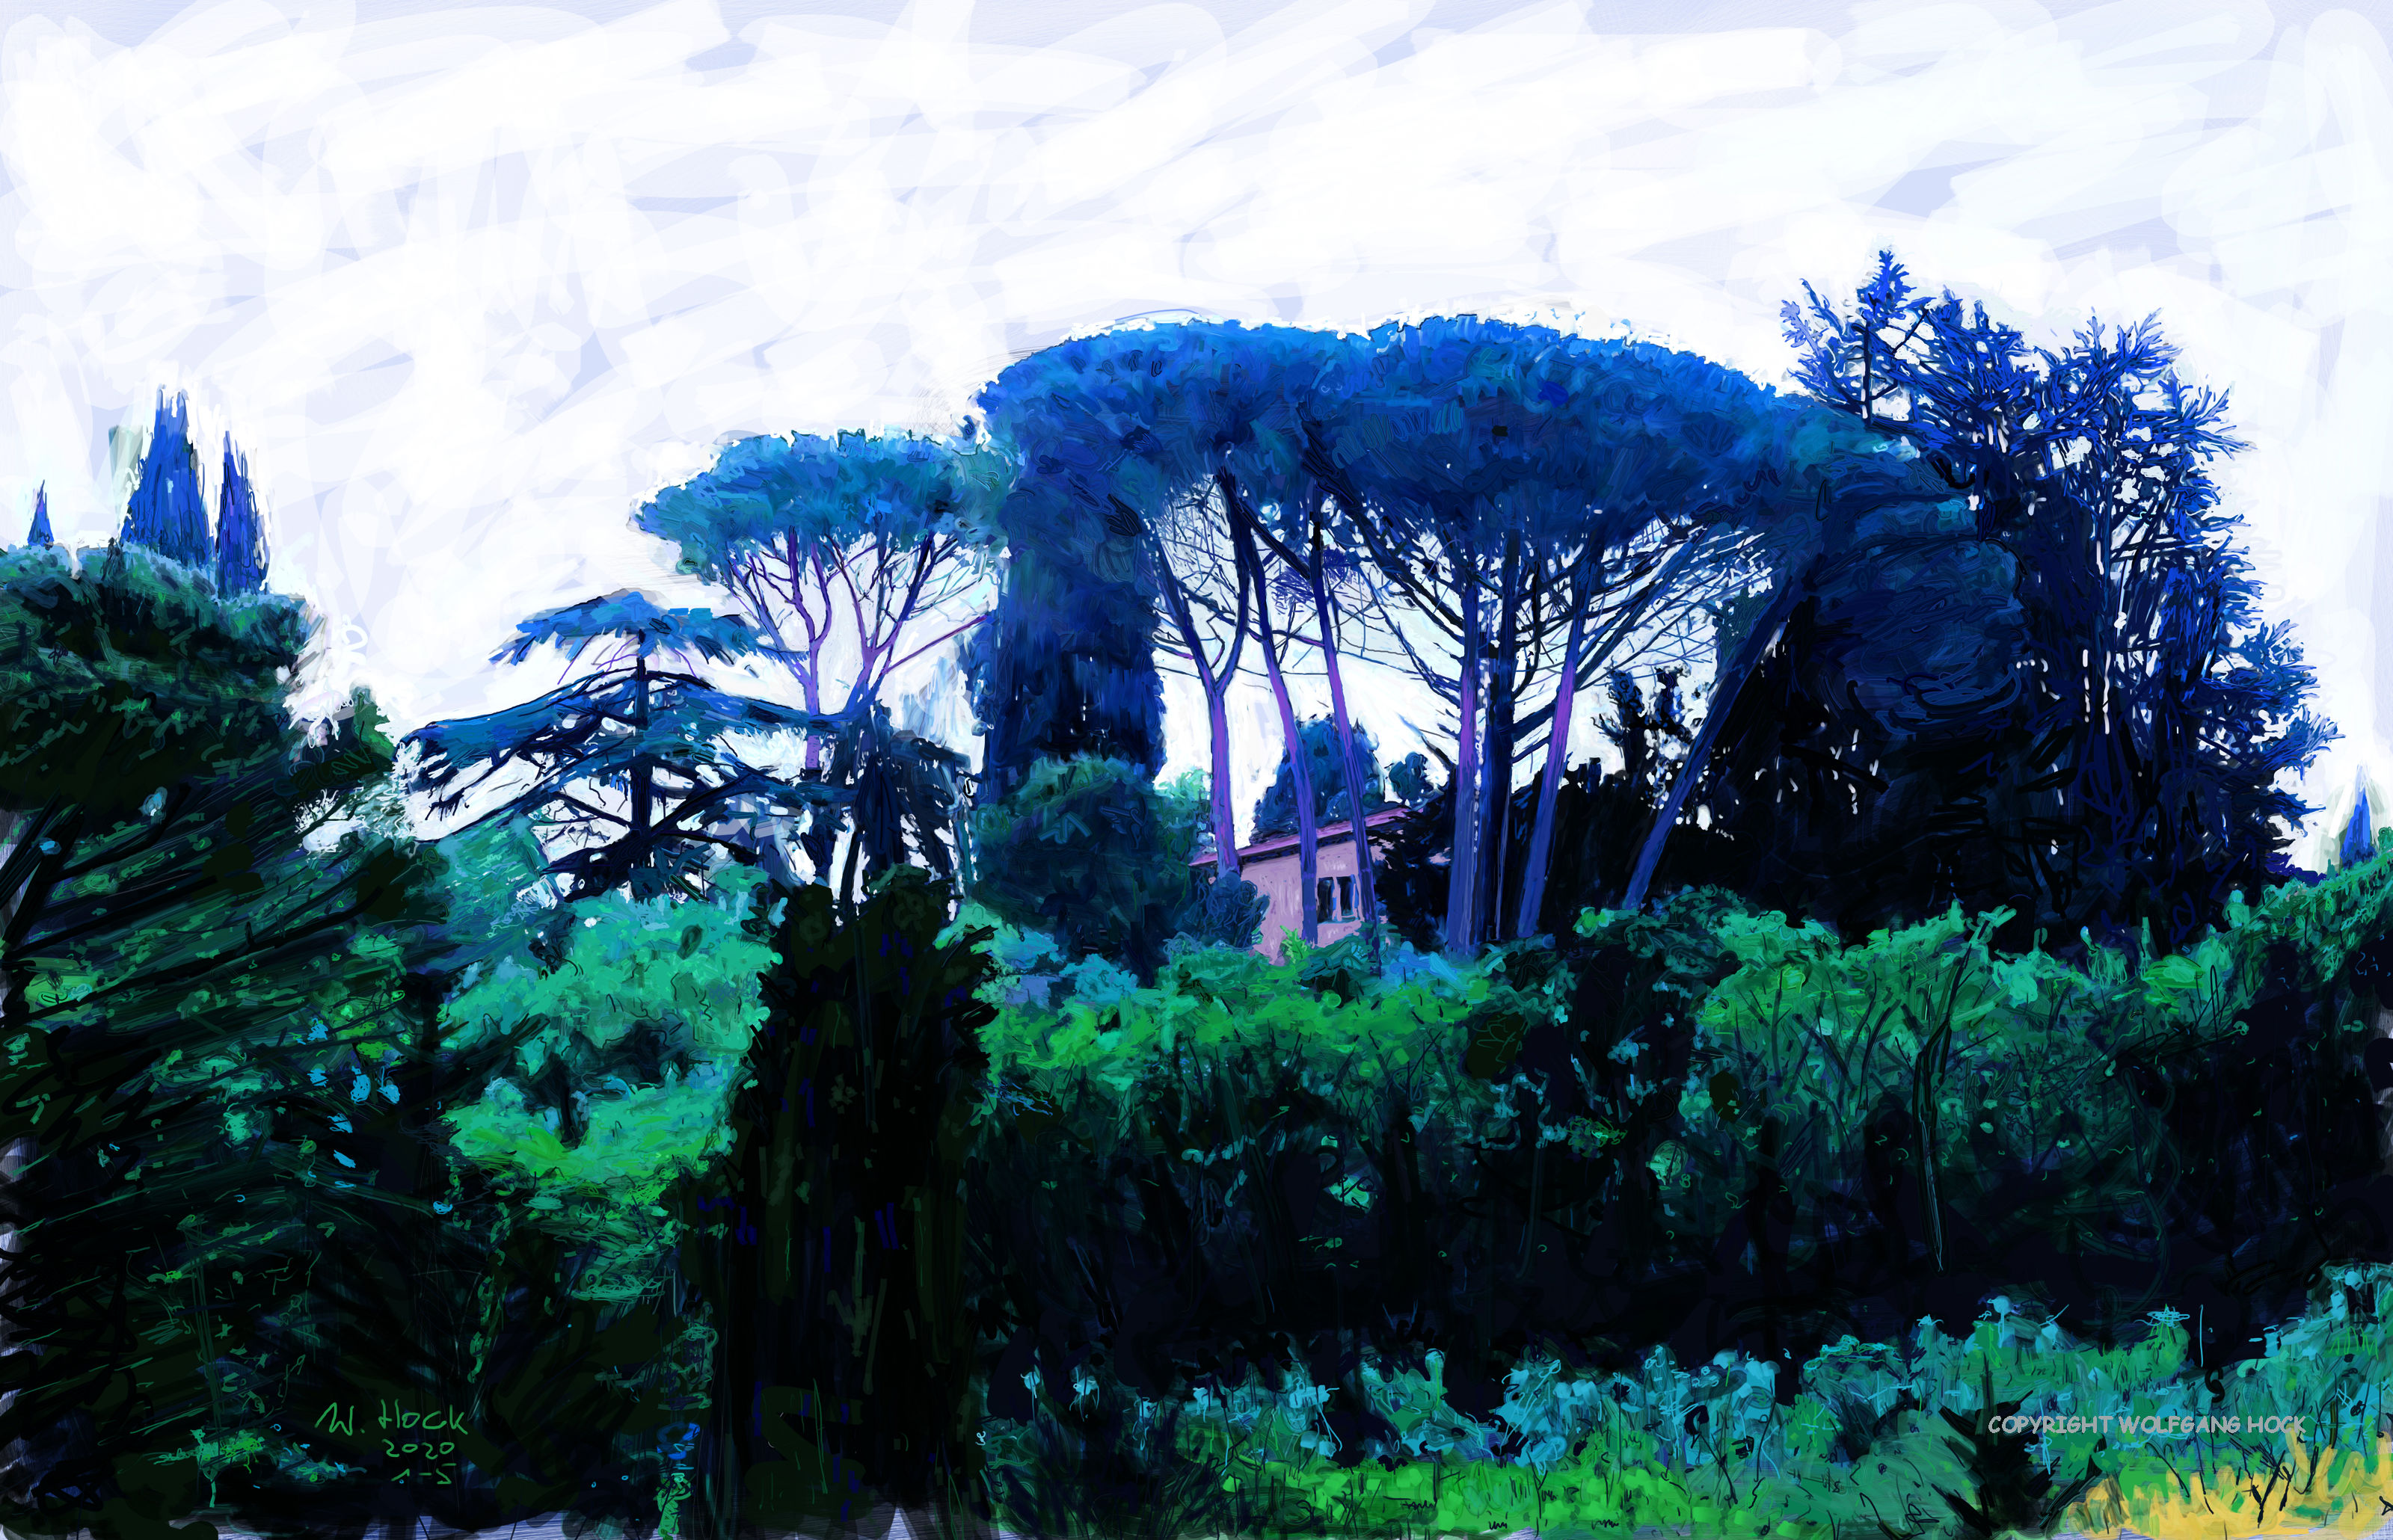 Die Villa in der Toscana - The house in Tuscany - O caserão na Toscana 2020   Handmade digital painting on canvas 170 x 110 cm (173 megapixels)